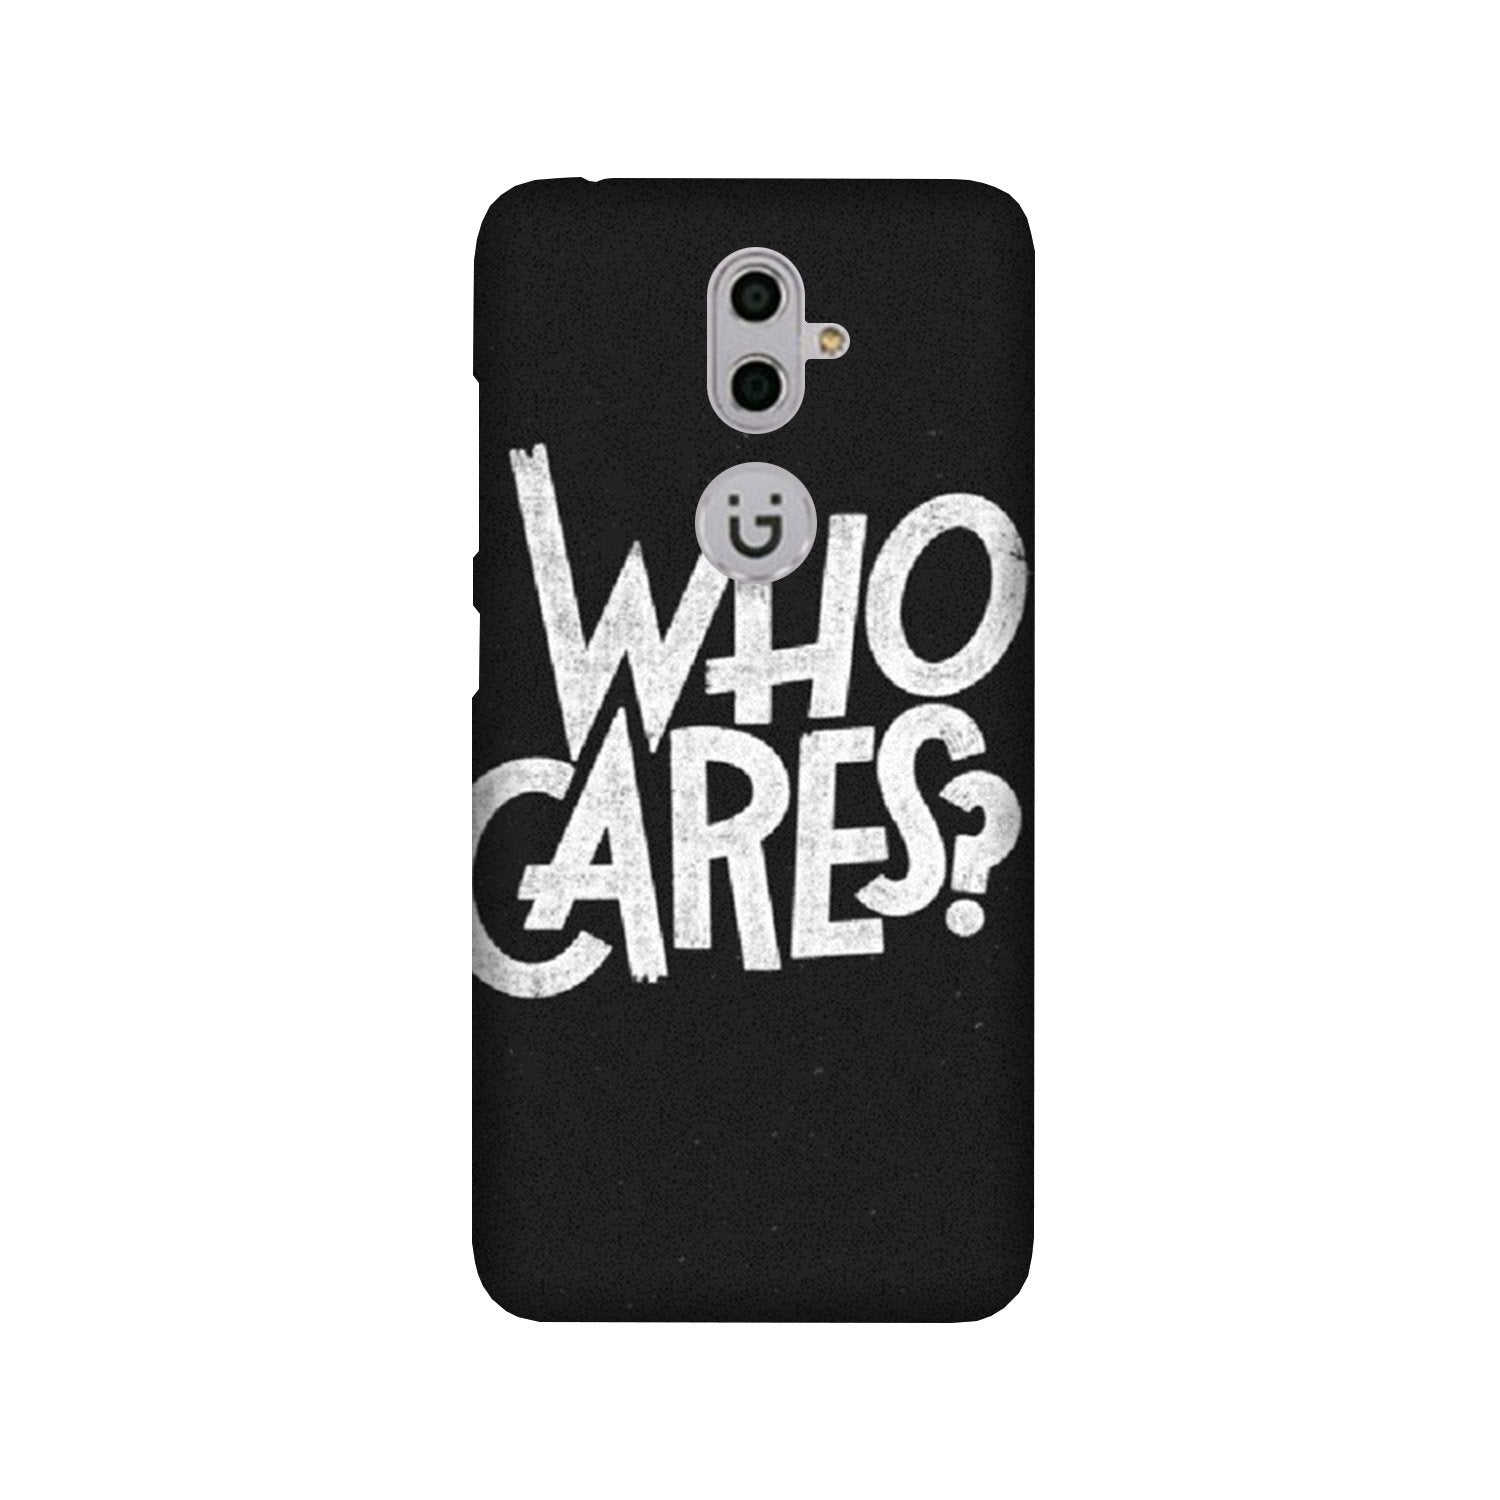 Who Cares Case for Gionee S9